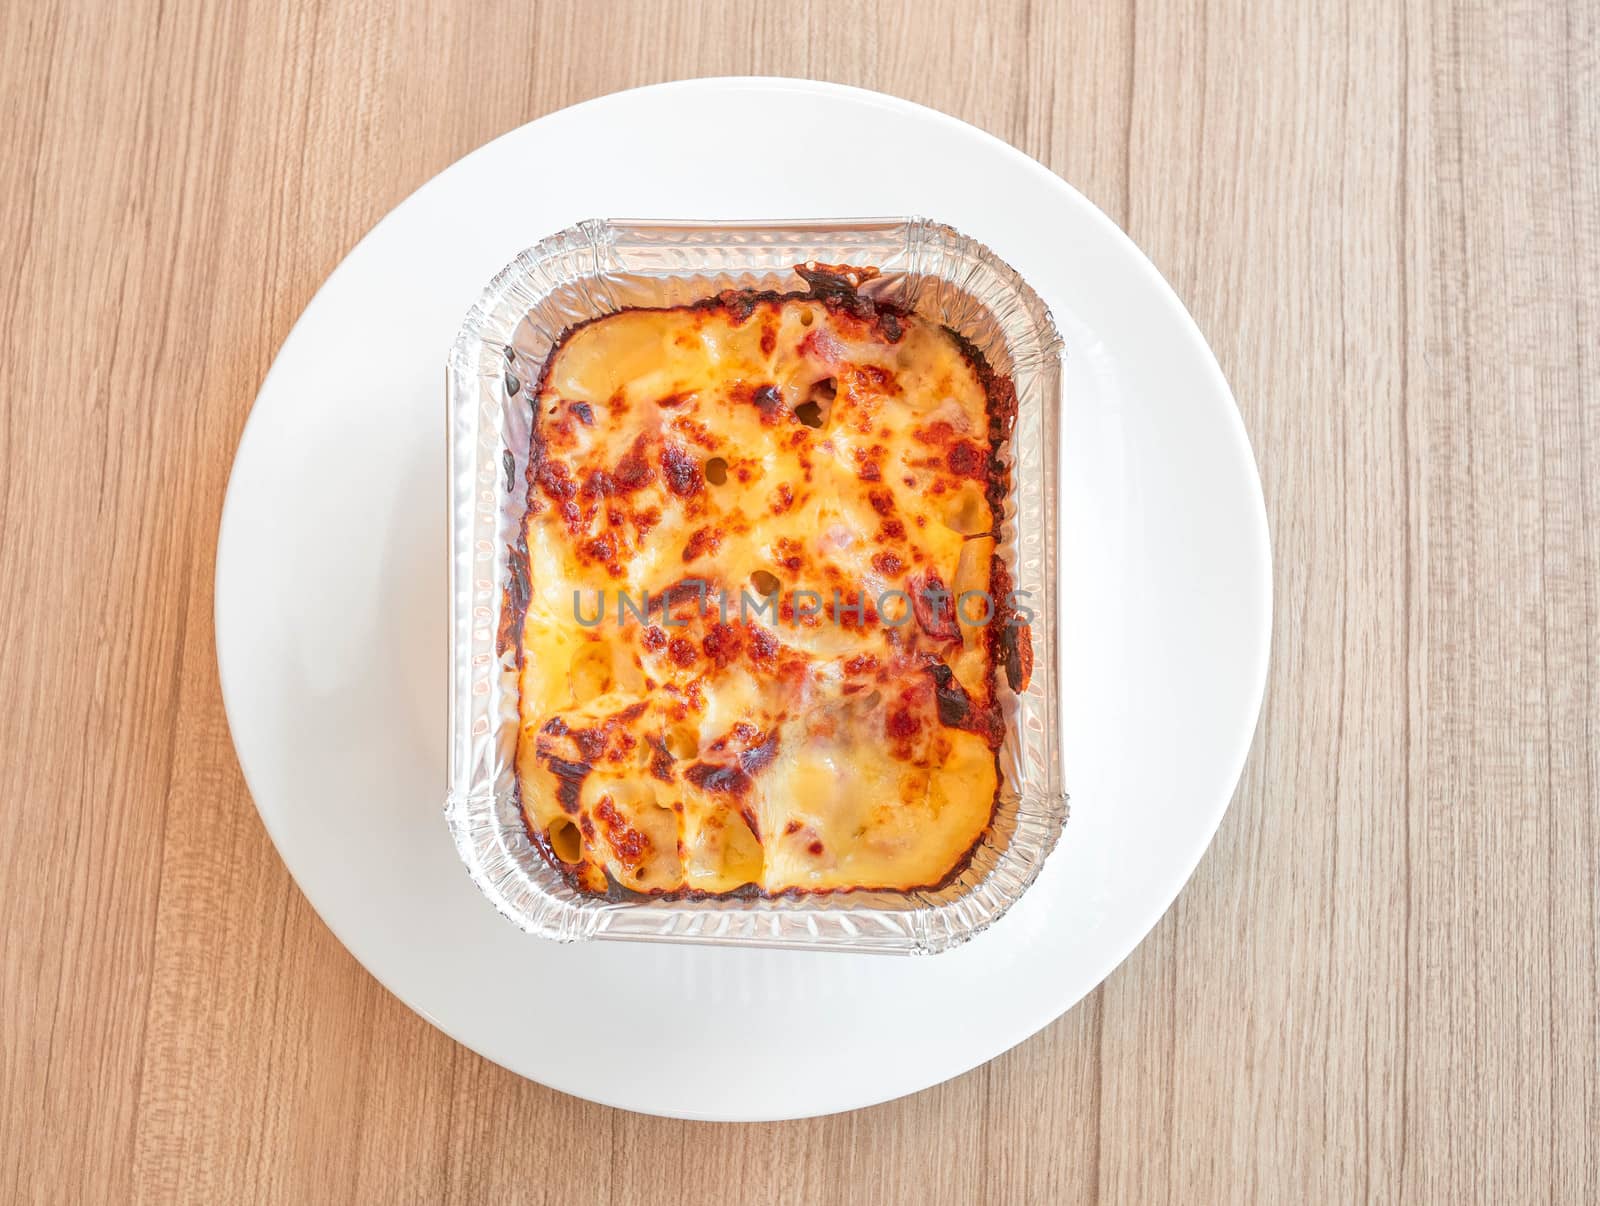 Macaroni with ham and cheese in a baking dish on wooden table. T by TEERASAK